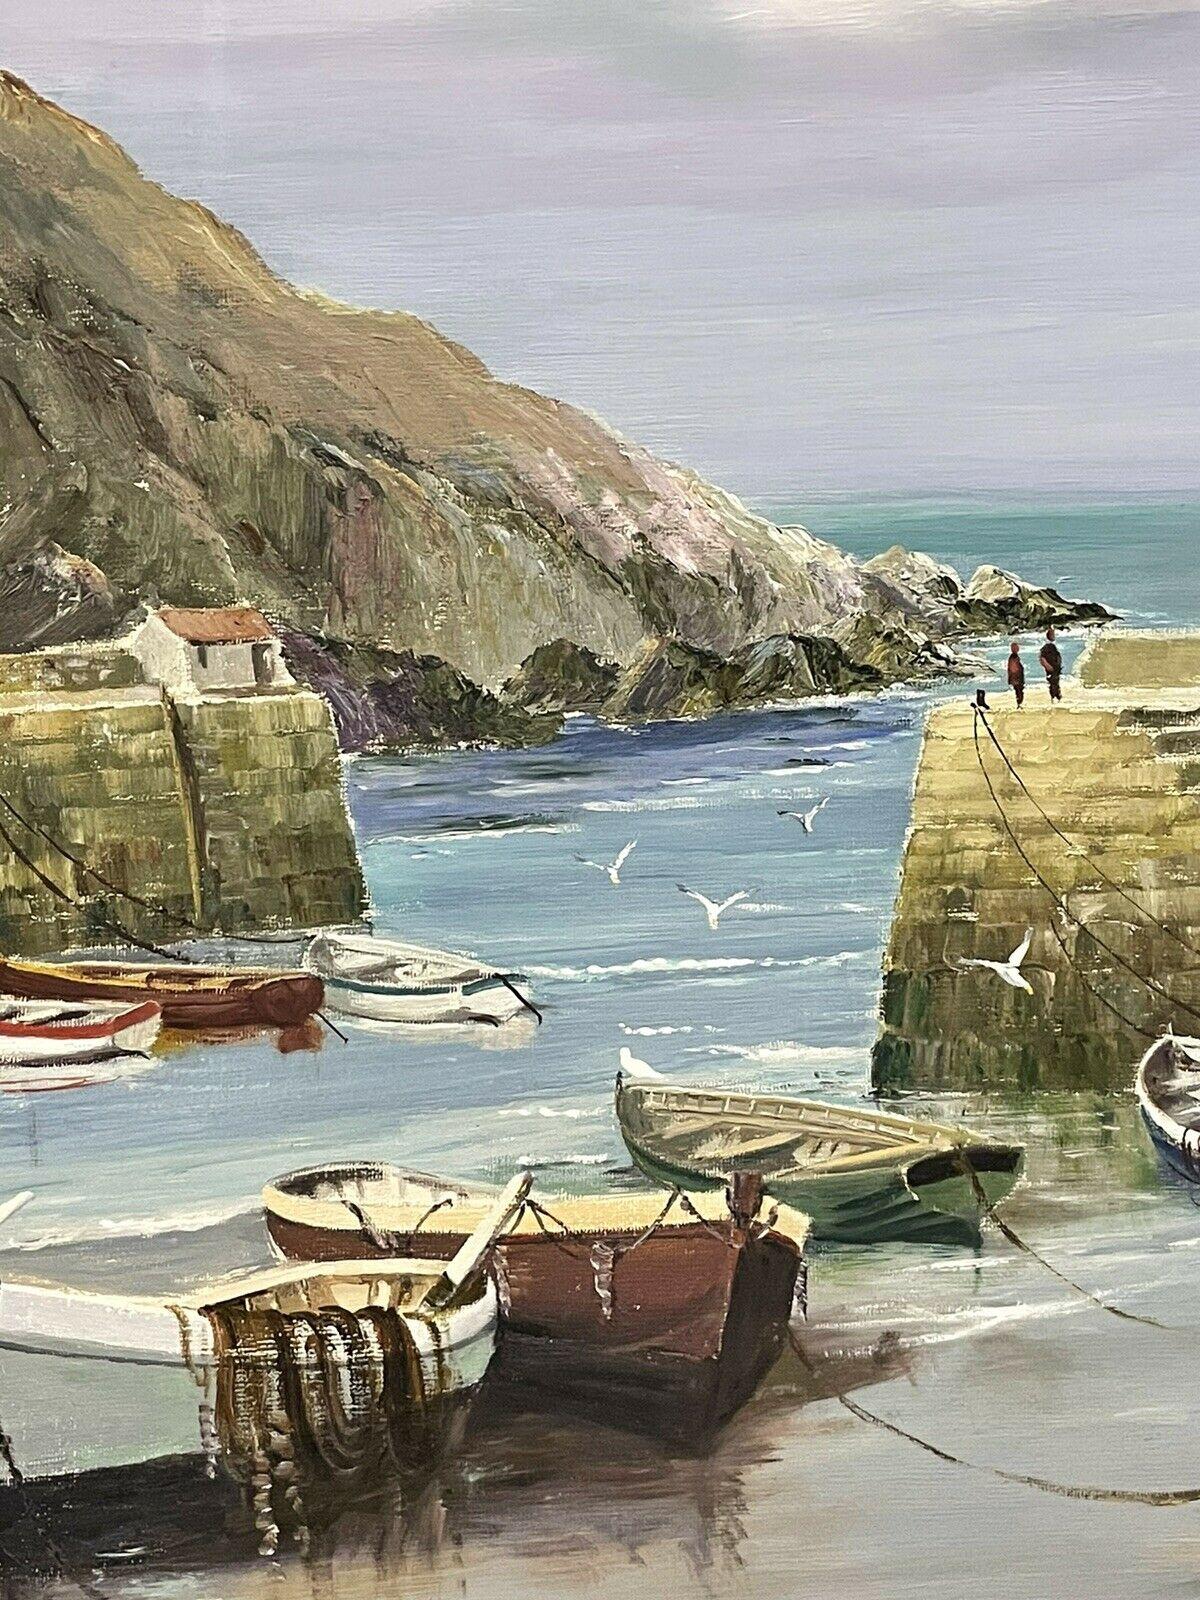 VINTAGE CORNISH FISHING HARBOR SCENE - SIGNED OIL PAINTING - Gray Landscape Painting by Lester Atack